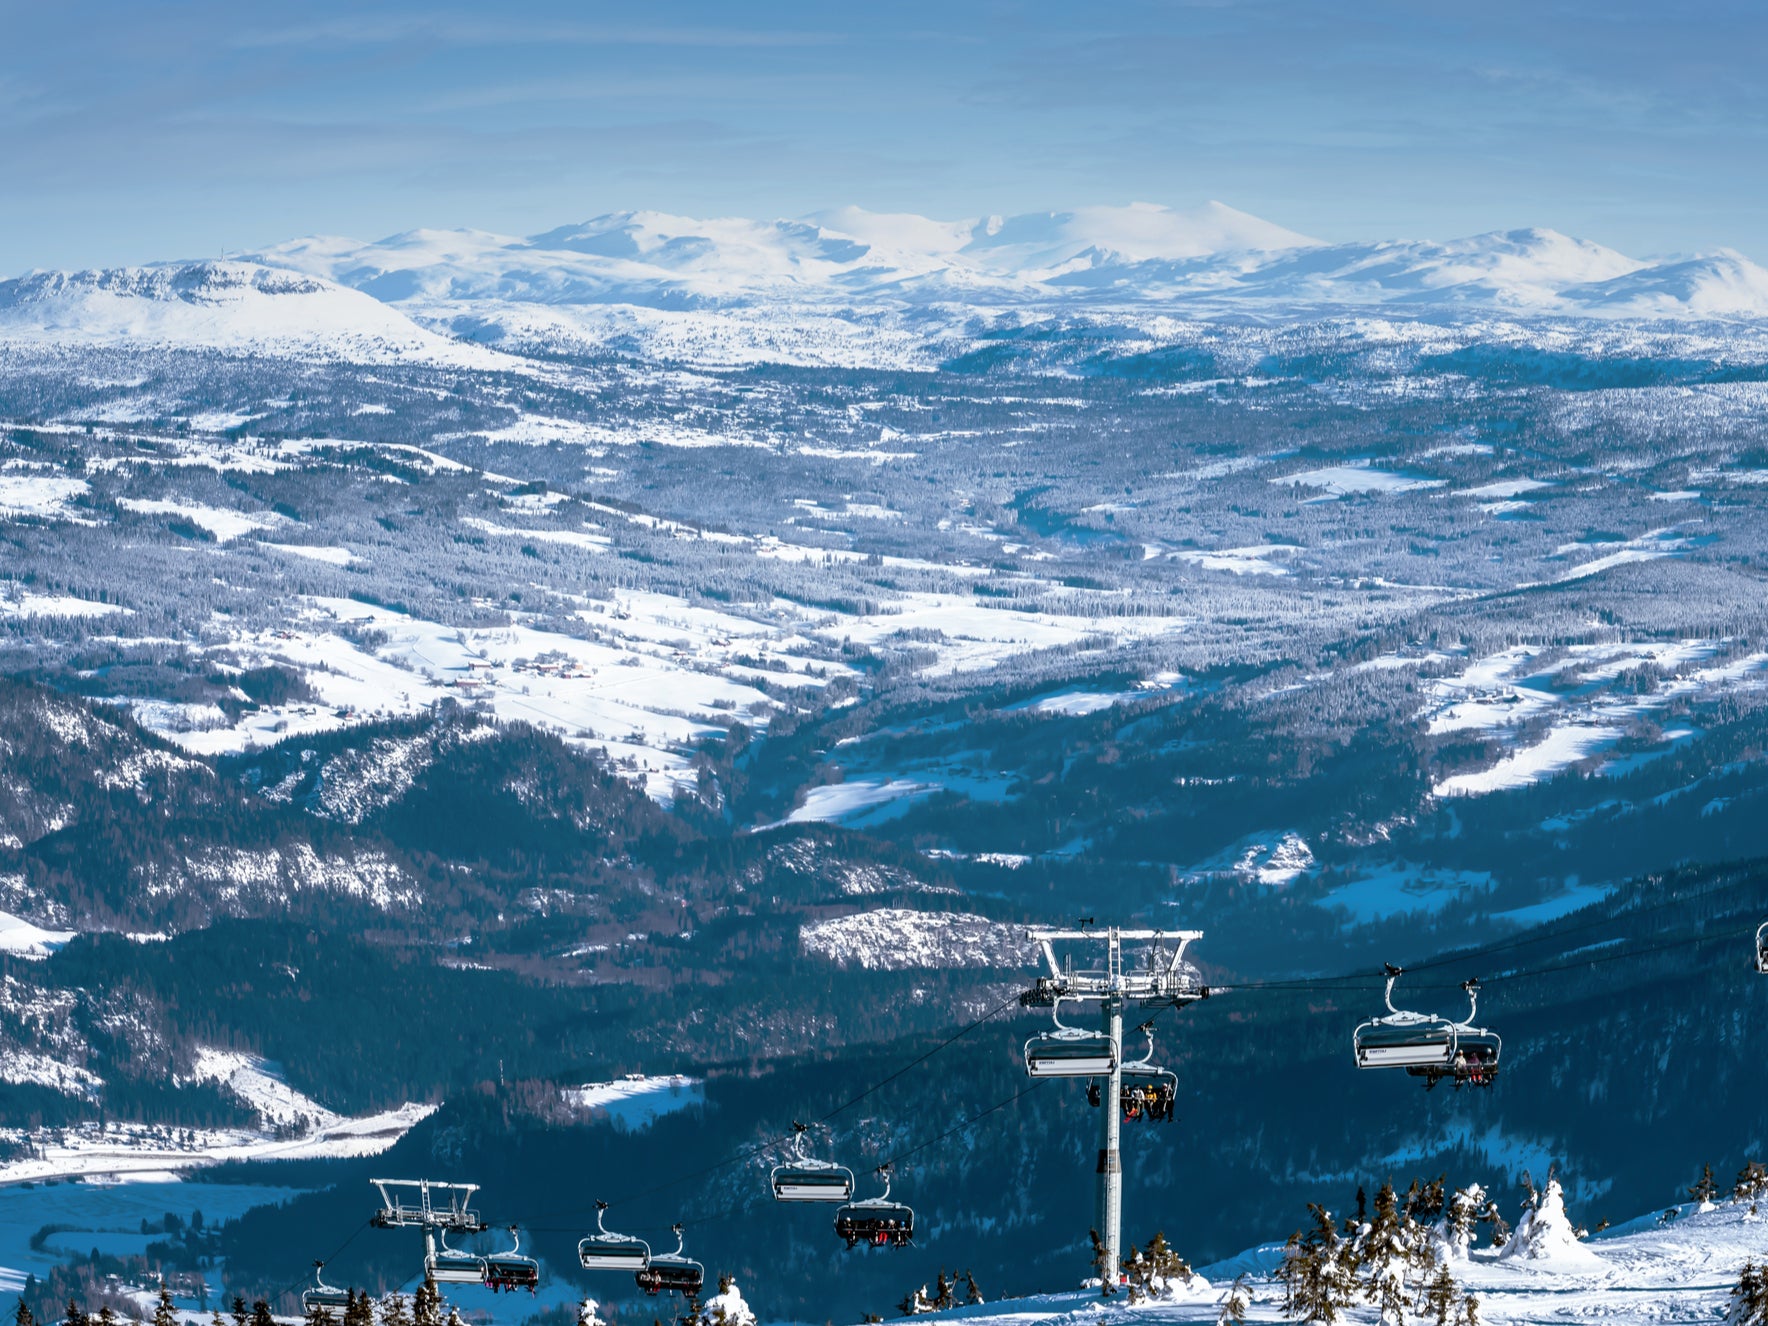 This Olympic ski resort has ski slopes, snow parks and family areas